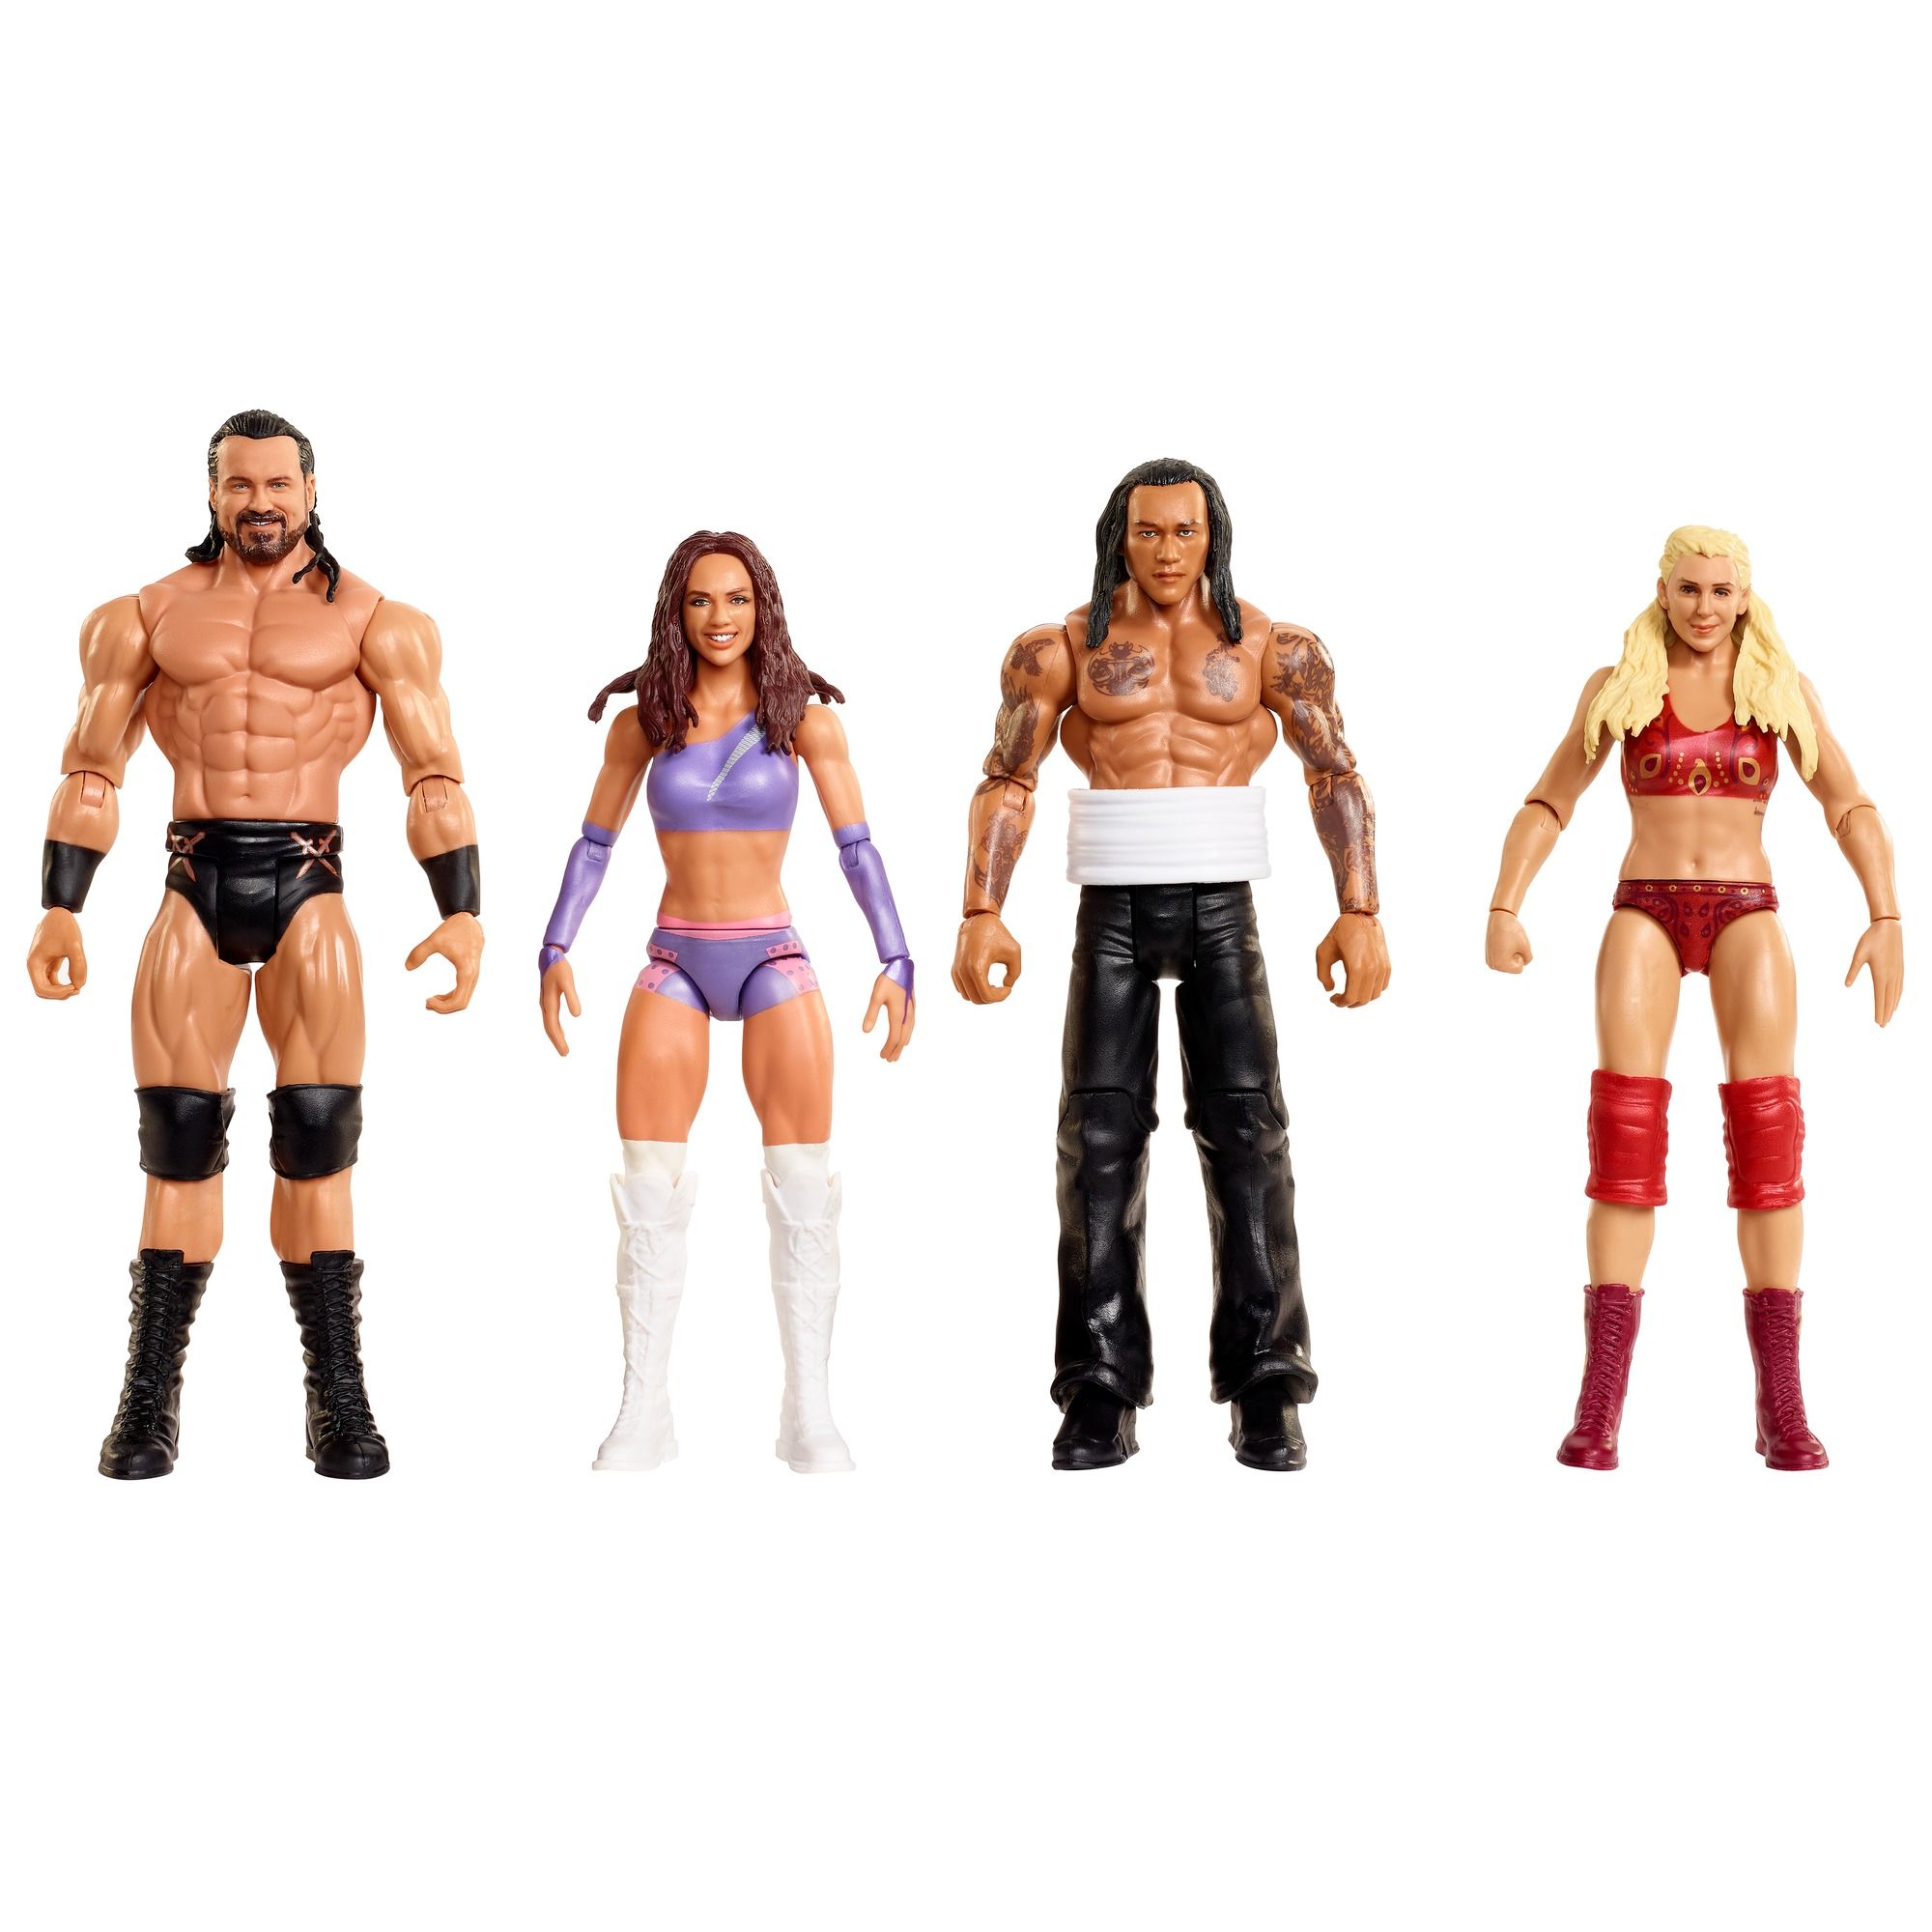 WWE Basic Series 122 wrestling action figures are now in stock at Phillips Toys